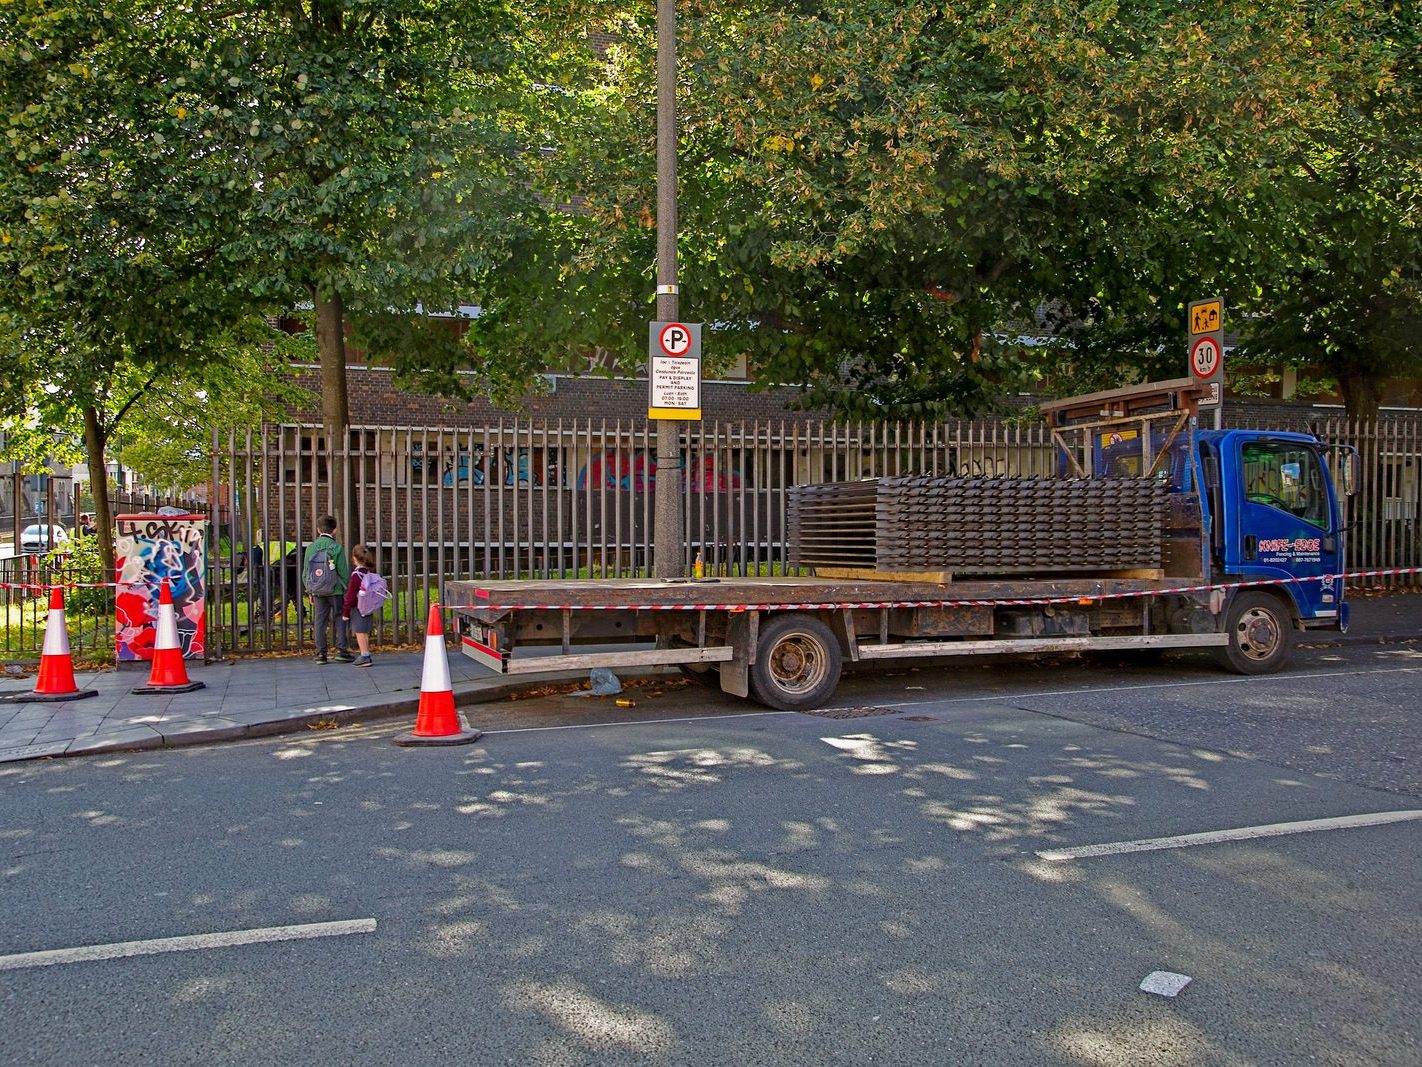 SECURITY FENCING BEING INSTALLED AROUND DORSET STREET FLATS [I DID NOT KNOW THAT THE COMPLEX WAS TO BE DEMOLISHED] 001